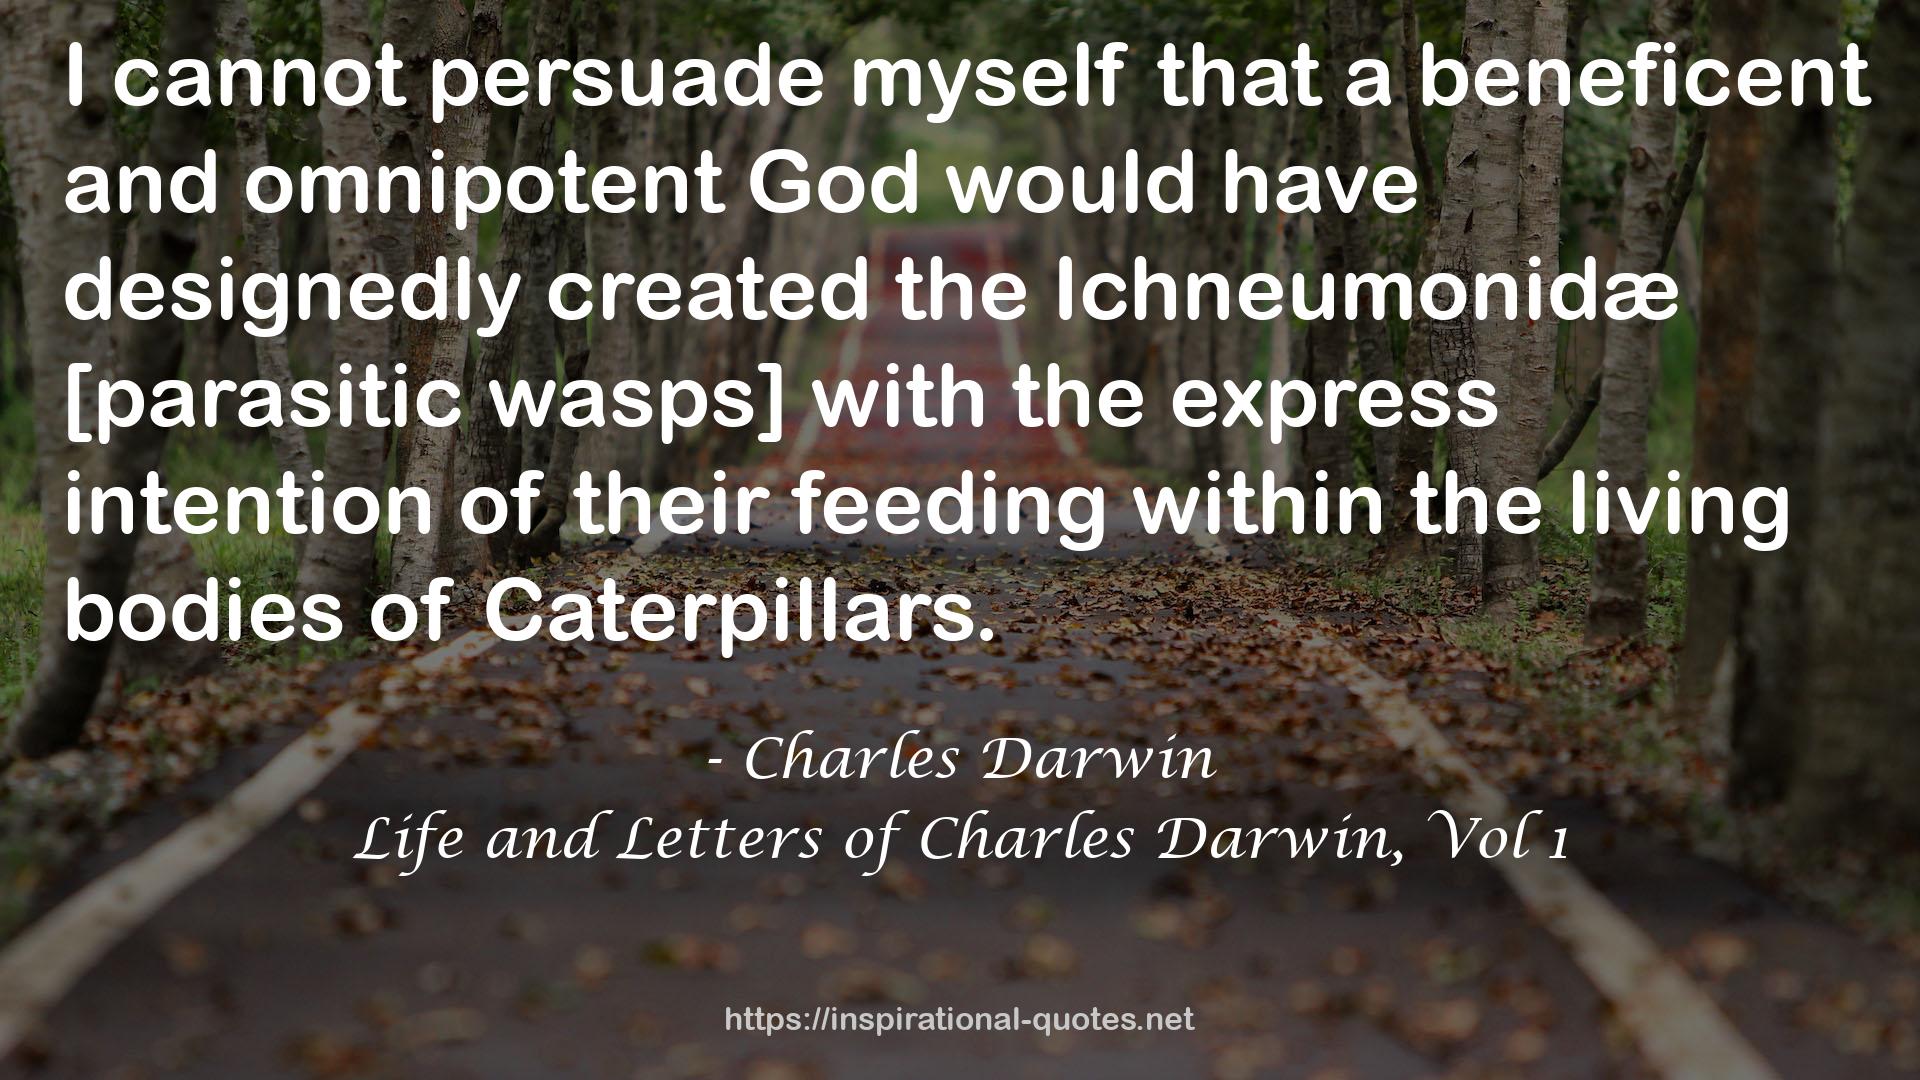 Life and Letters of Charles Darwin, Vol 1 QUOTES